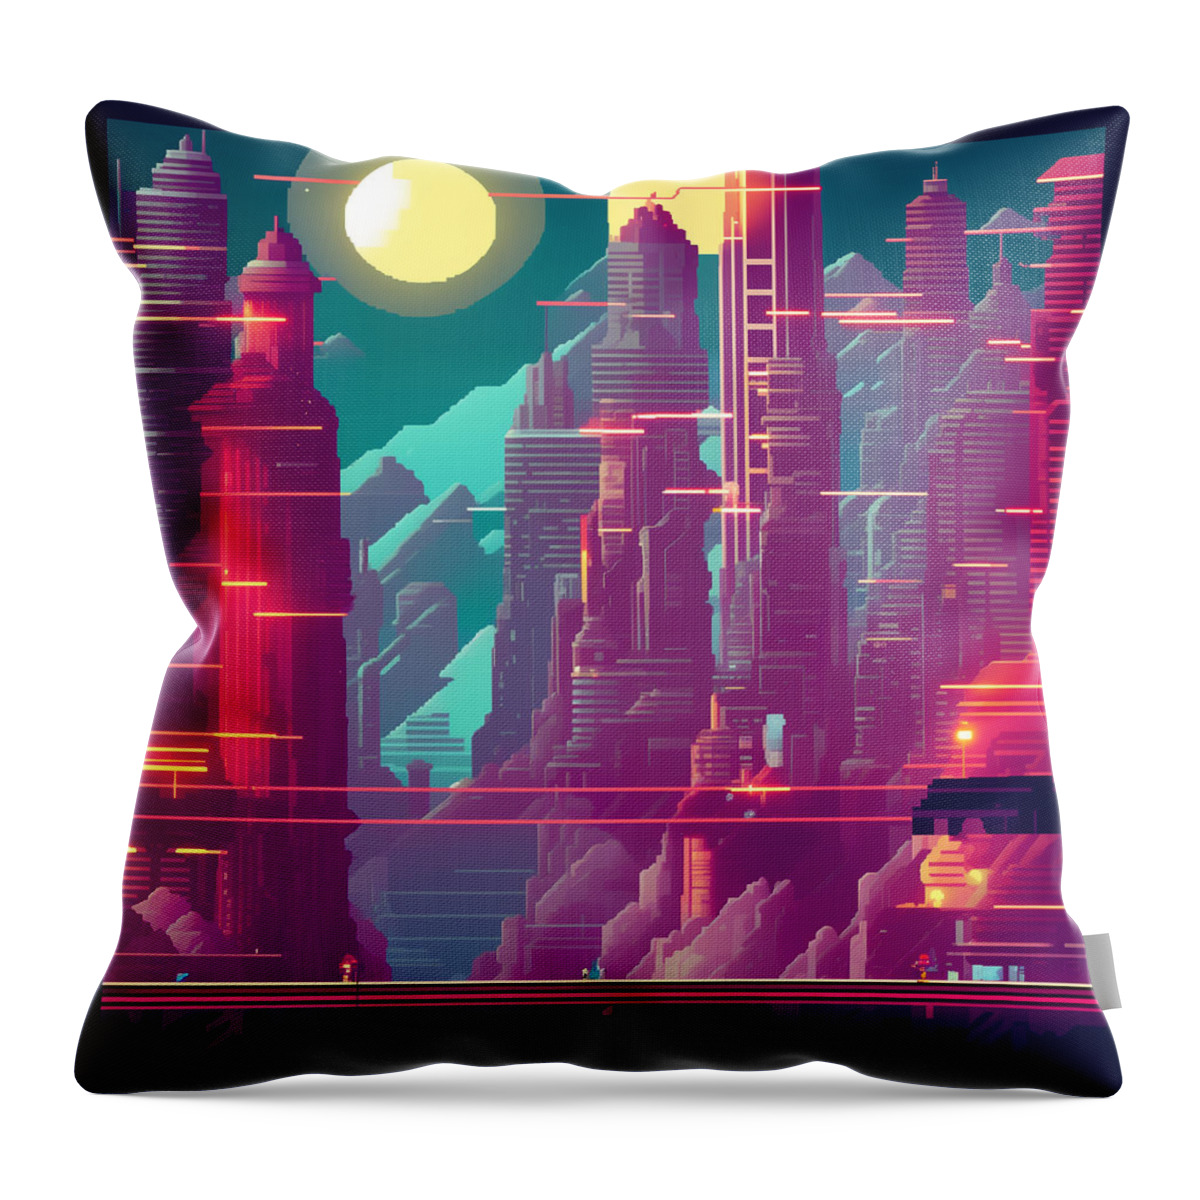 Pixel Throw Pillow featuring the digital art Cyber city by Quik Digicon Art Club